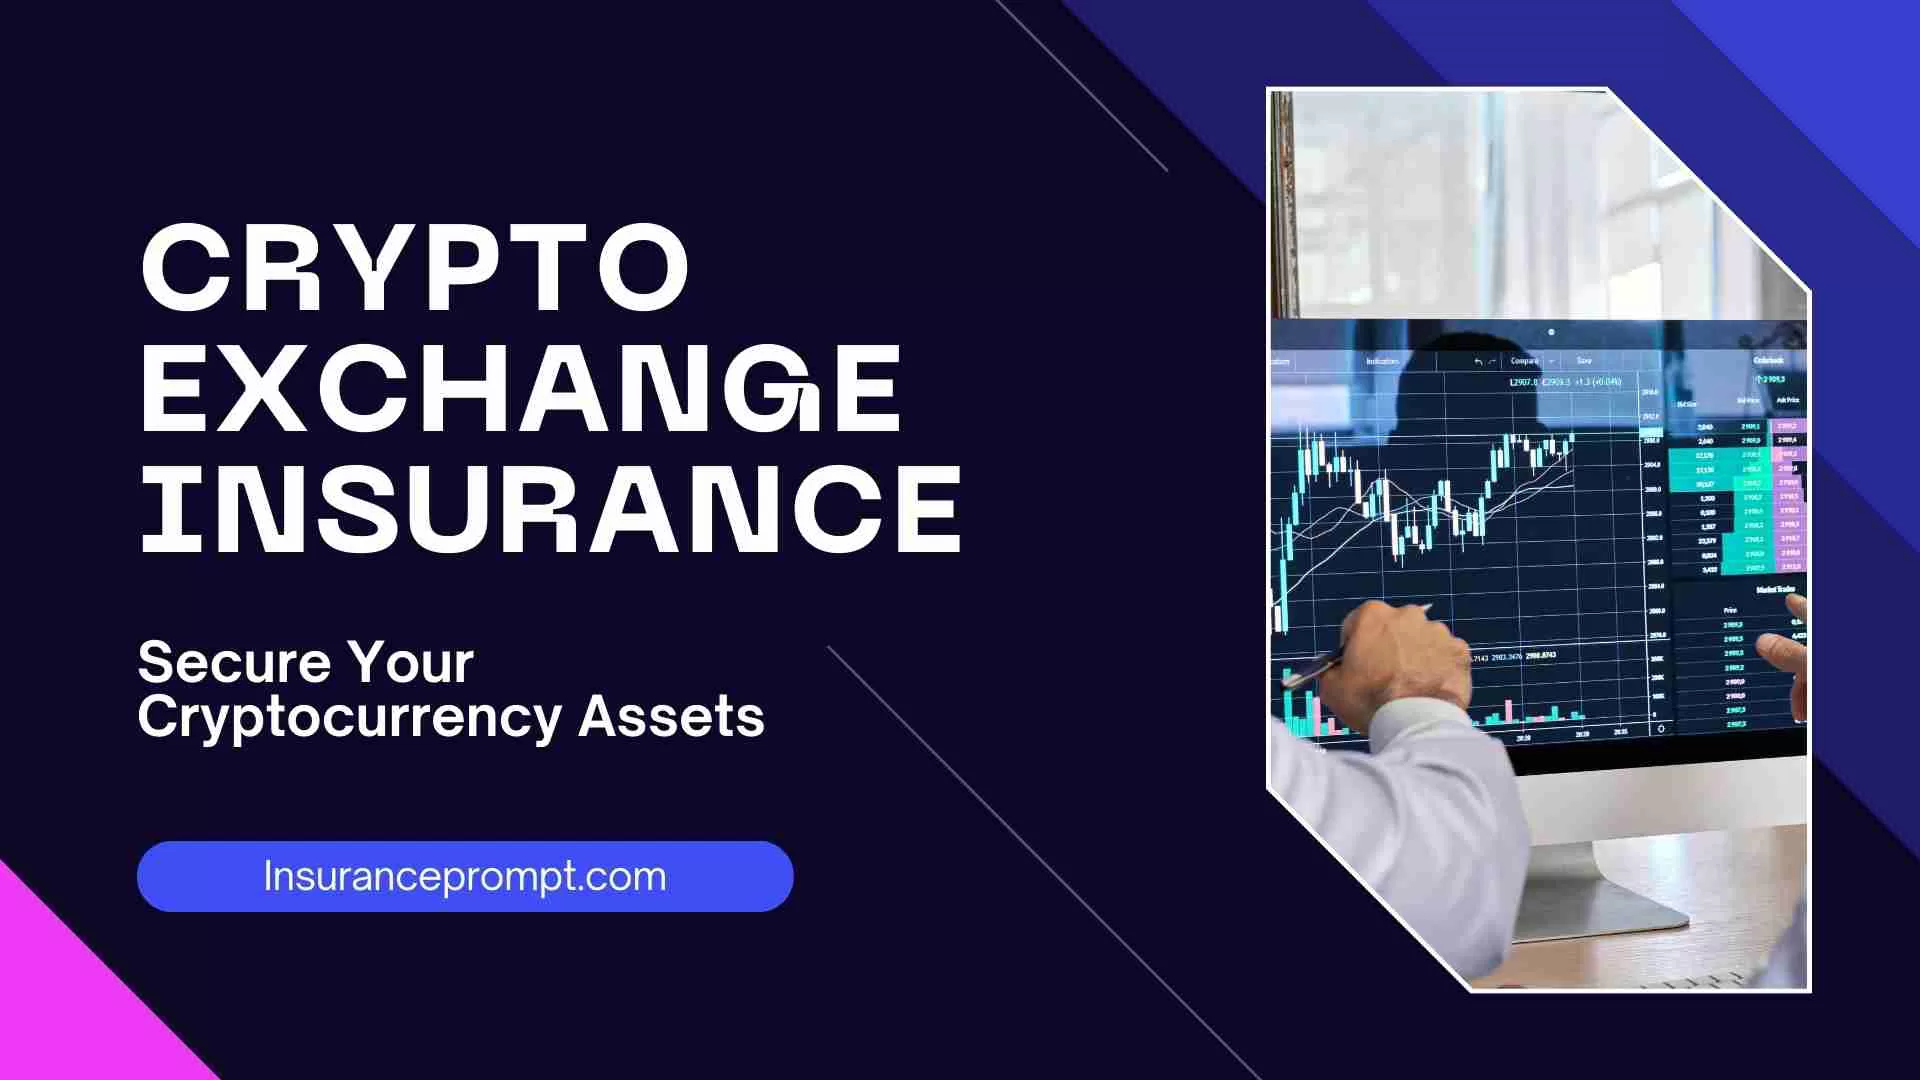 Crypto Exchange Insurance: Secure Your Cryptocurrency Assets